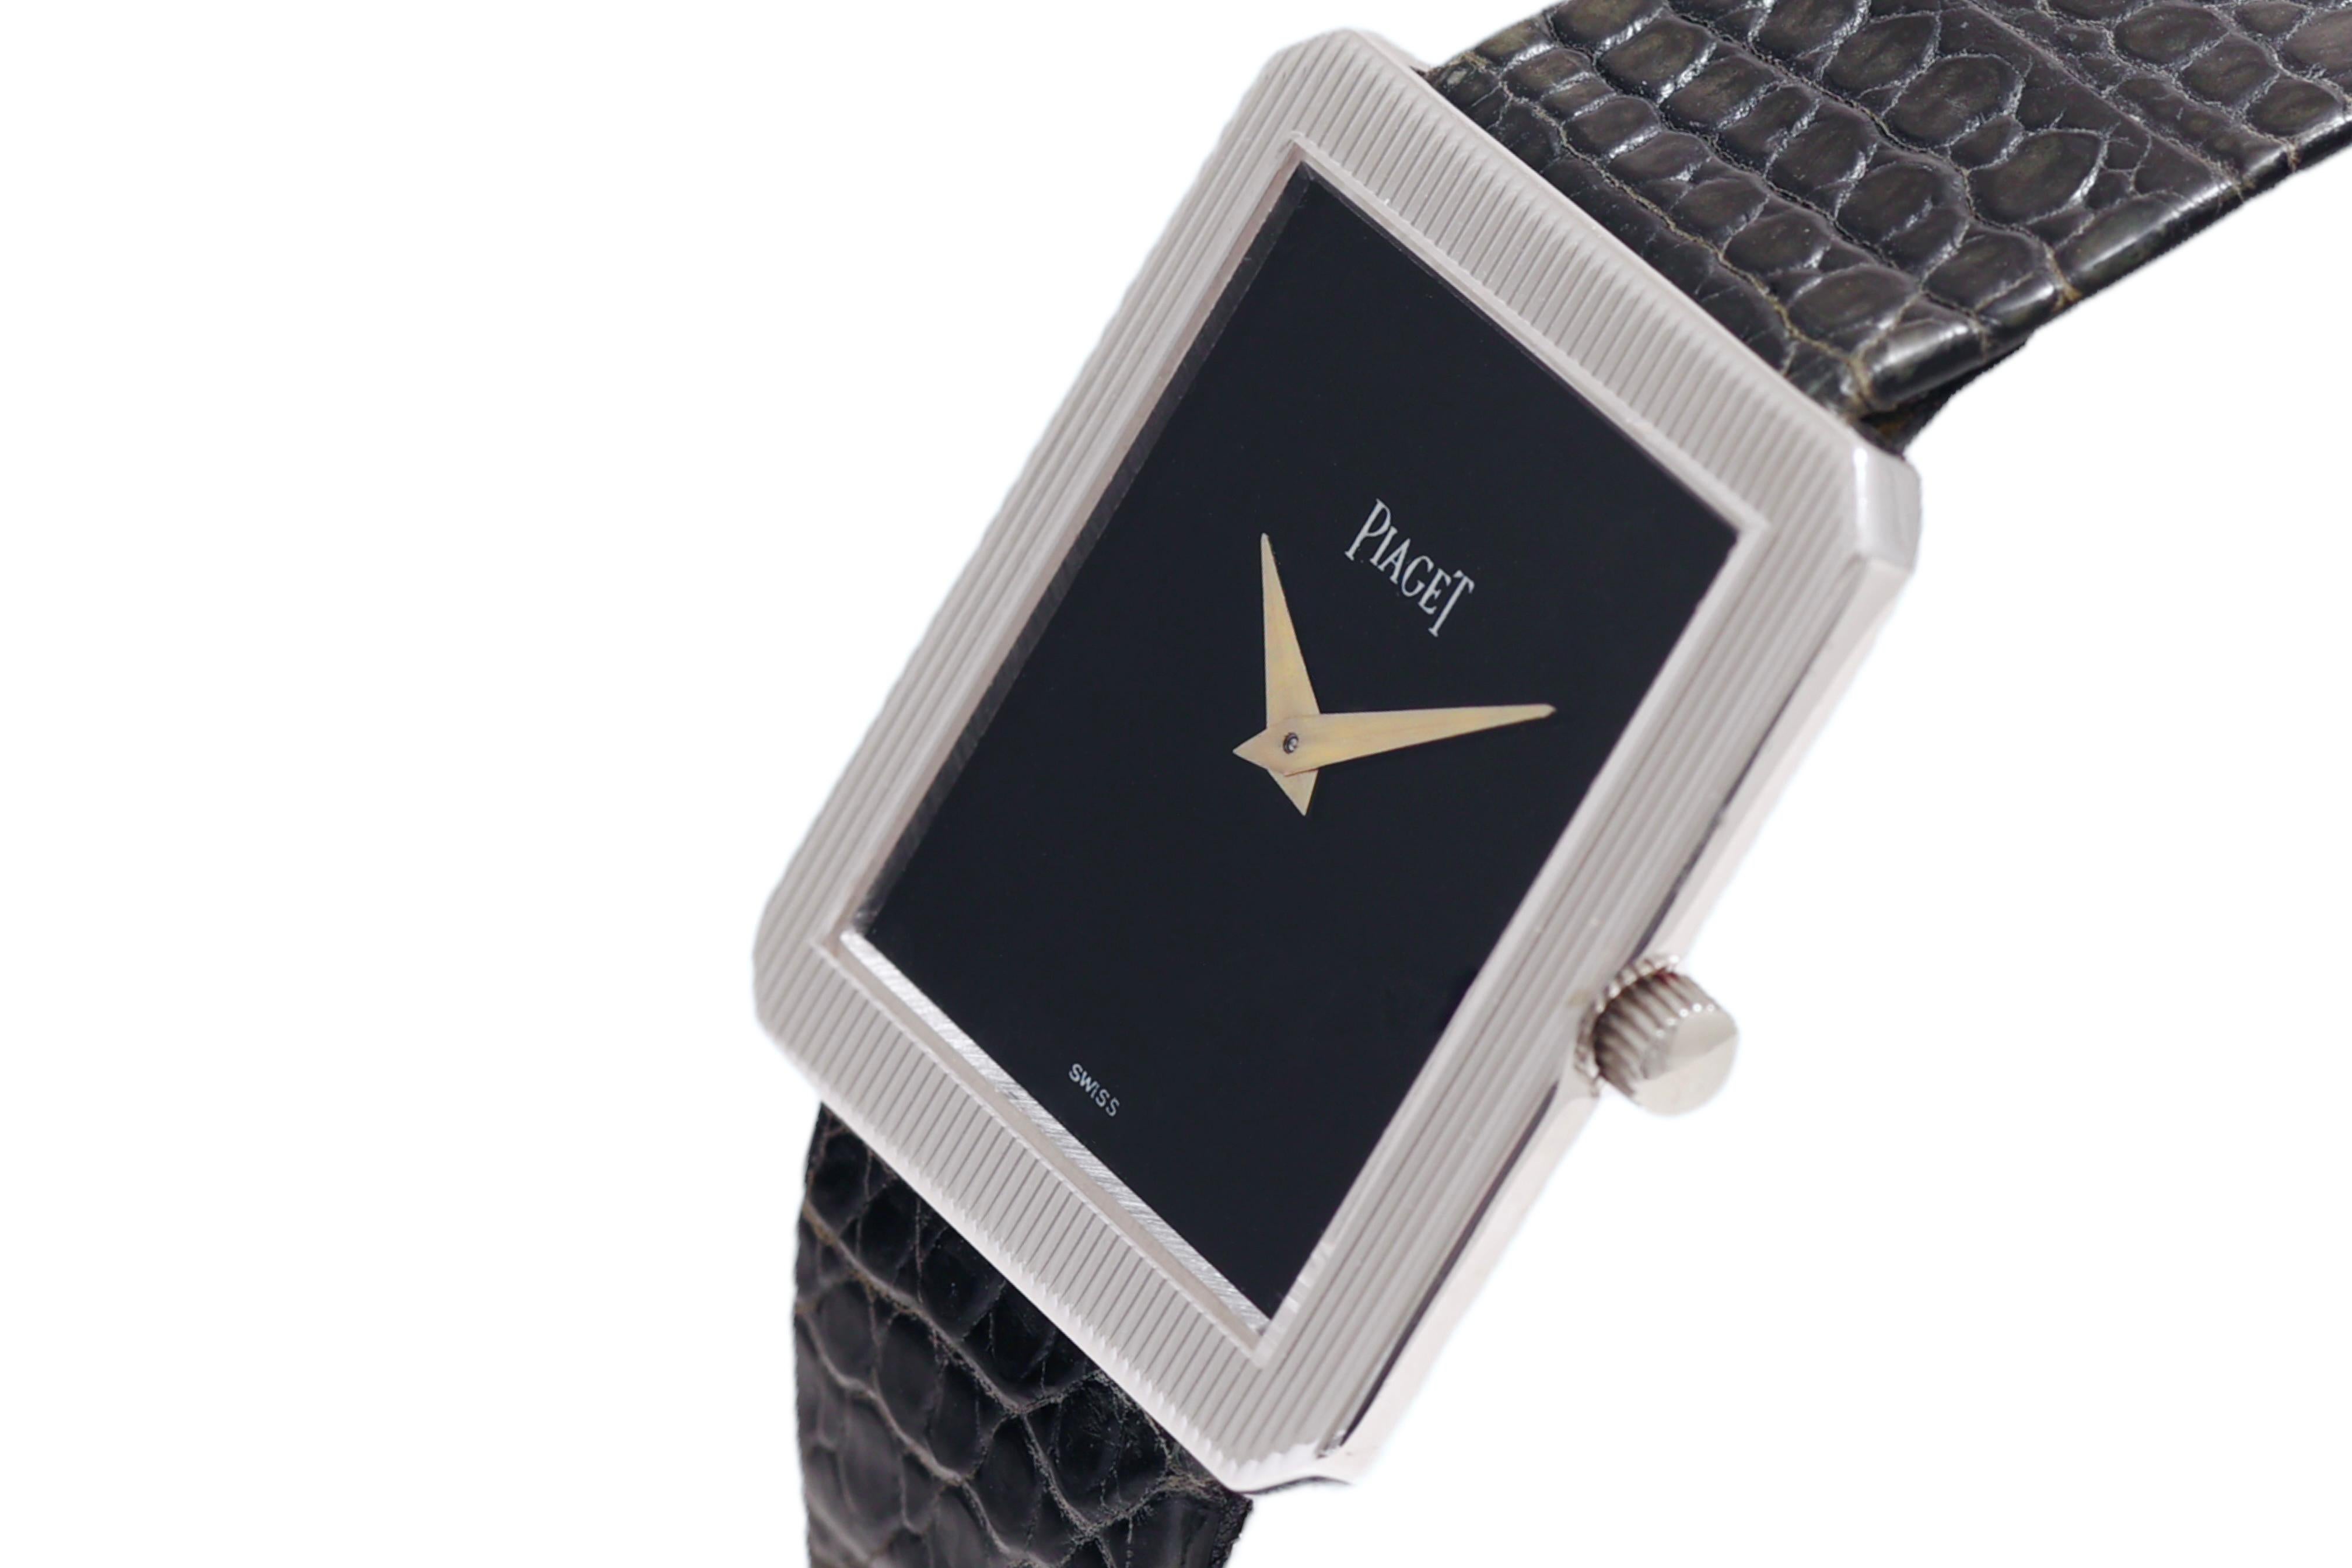 18 Kt White Gold Piaget Protocole Wrist Watch, Manual Winding In Excellent Condition For Sale In Antwerp, BE